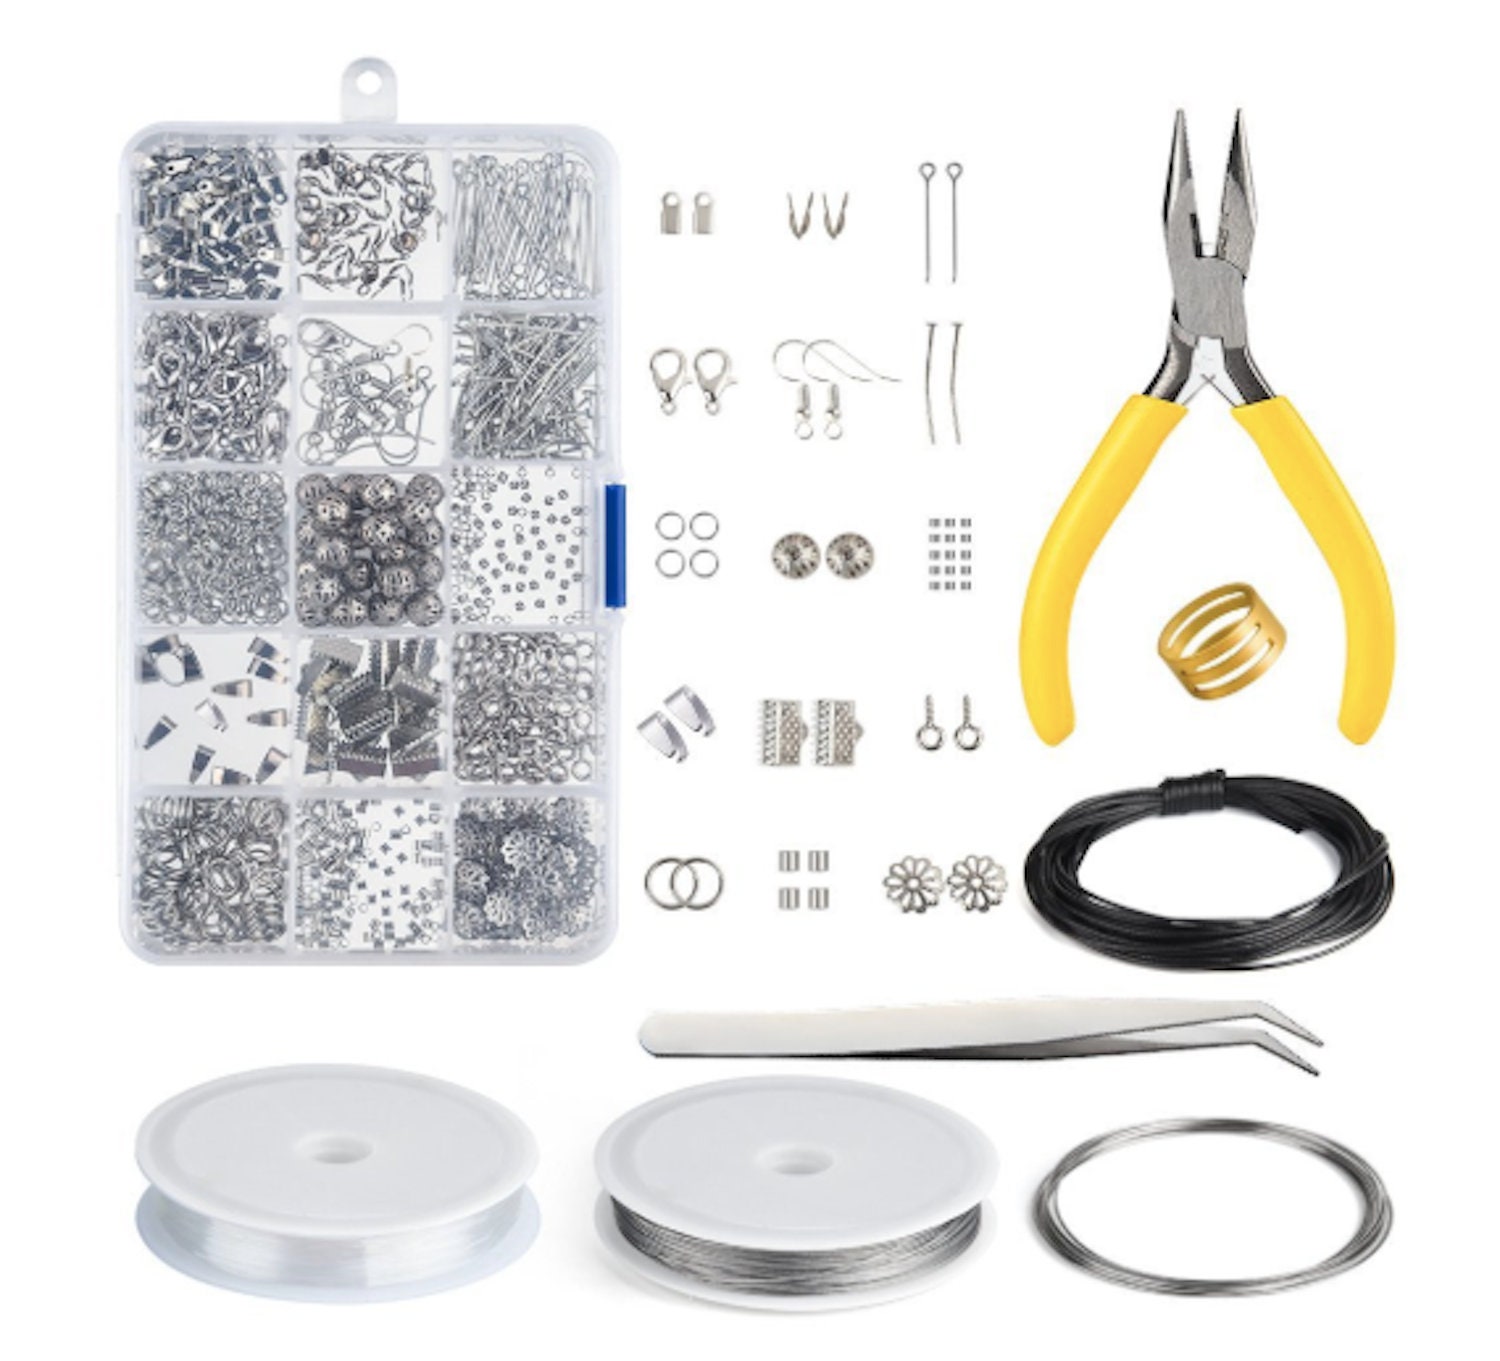 Ahmagen Jewelry Making Kit,Jewelry Making Supplies Includes Jewelry Pliers, Beading Wire, Jewelry Beads and Charms Findings for Jewelry Necklace Earring